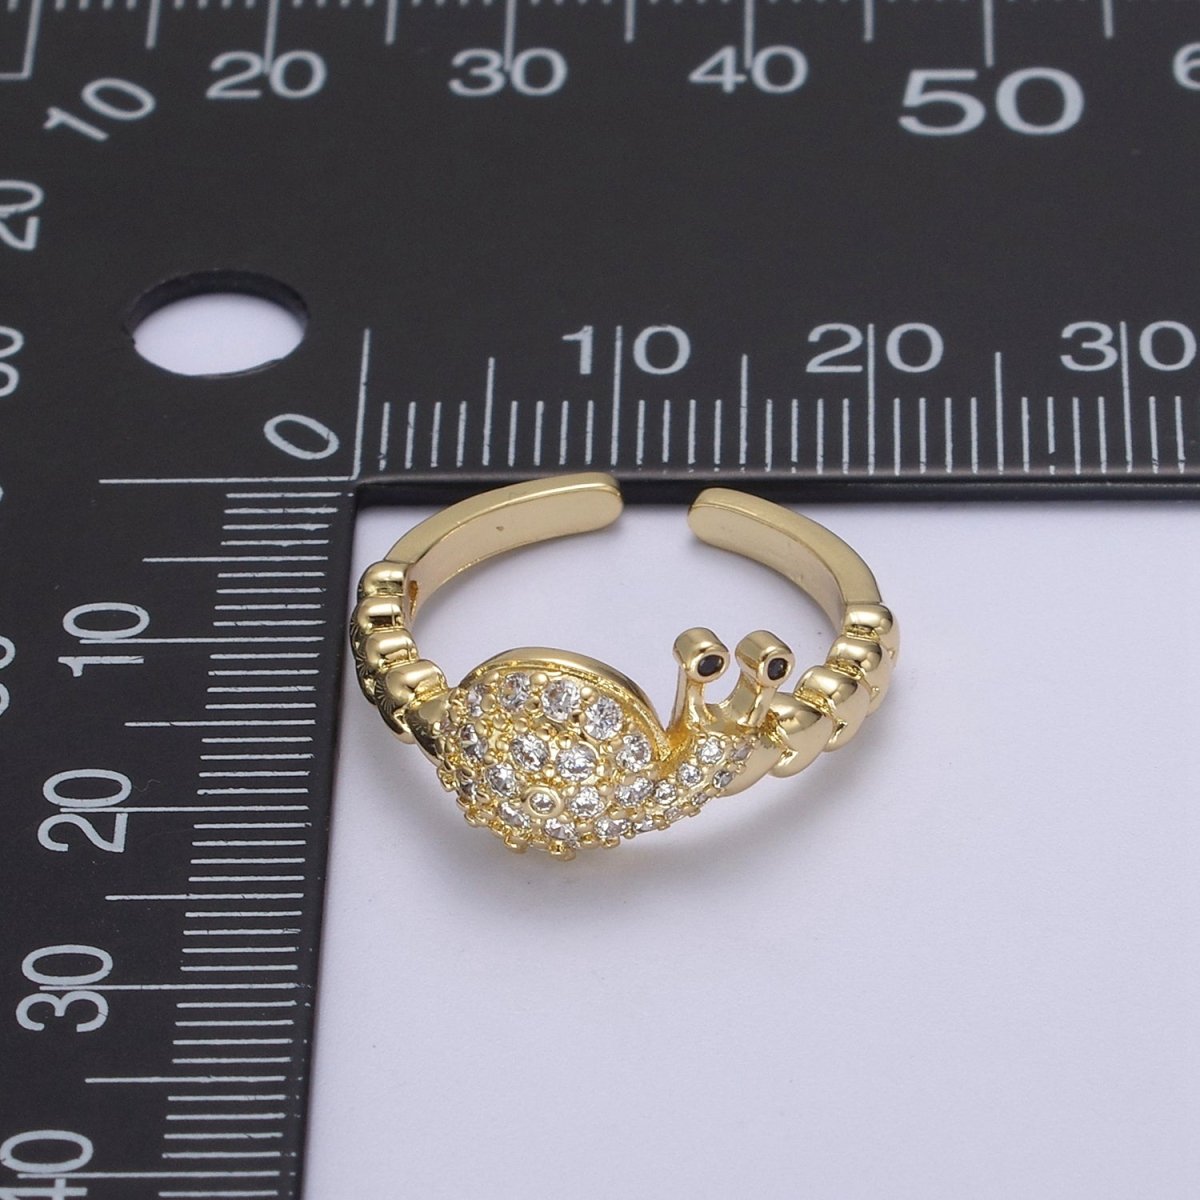 Micro Pave Snail Ring, Heart Textured Gold Adjustable Band Ring, 24K Gold Filled Nature Ocean Wildlife Under The Sea Ring U-441 - DLUXCA